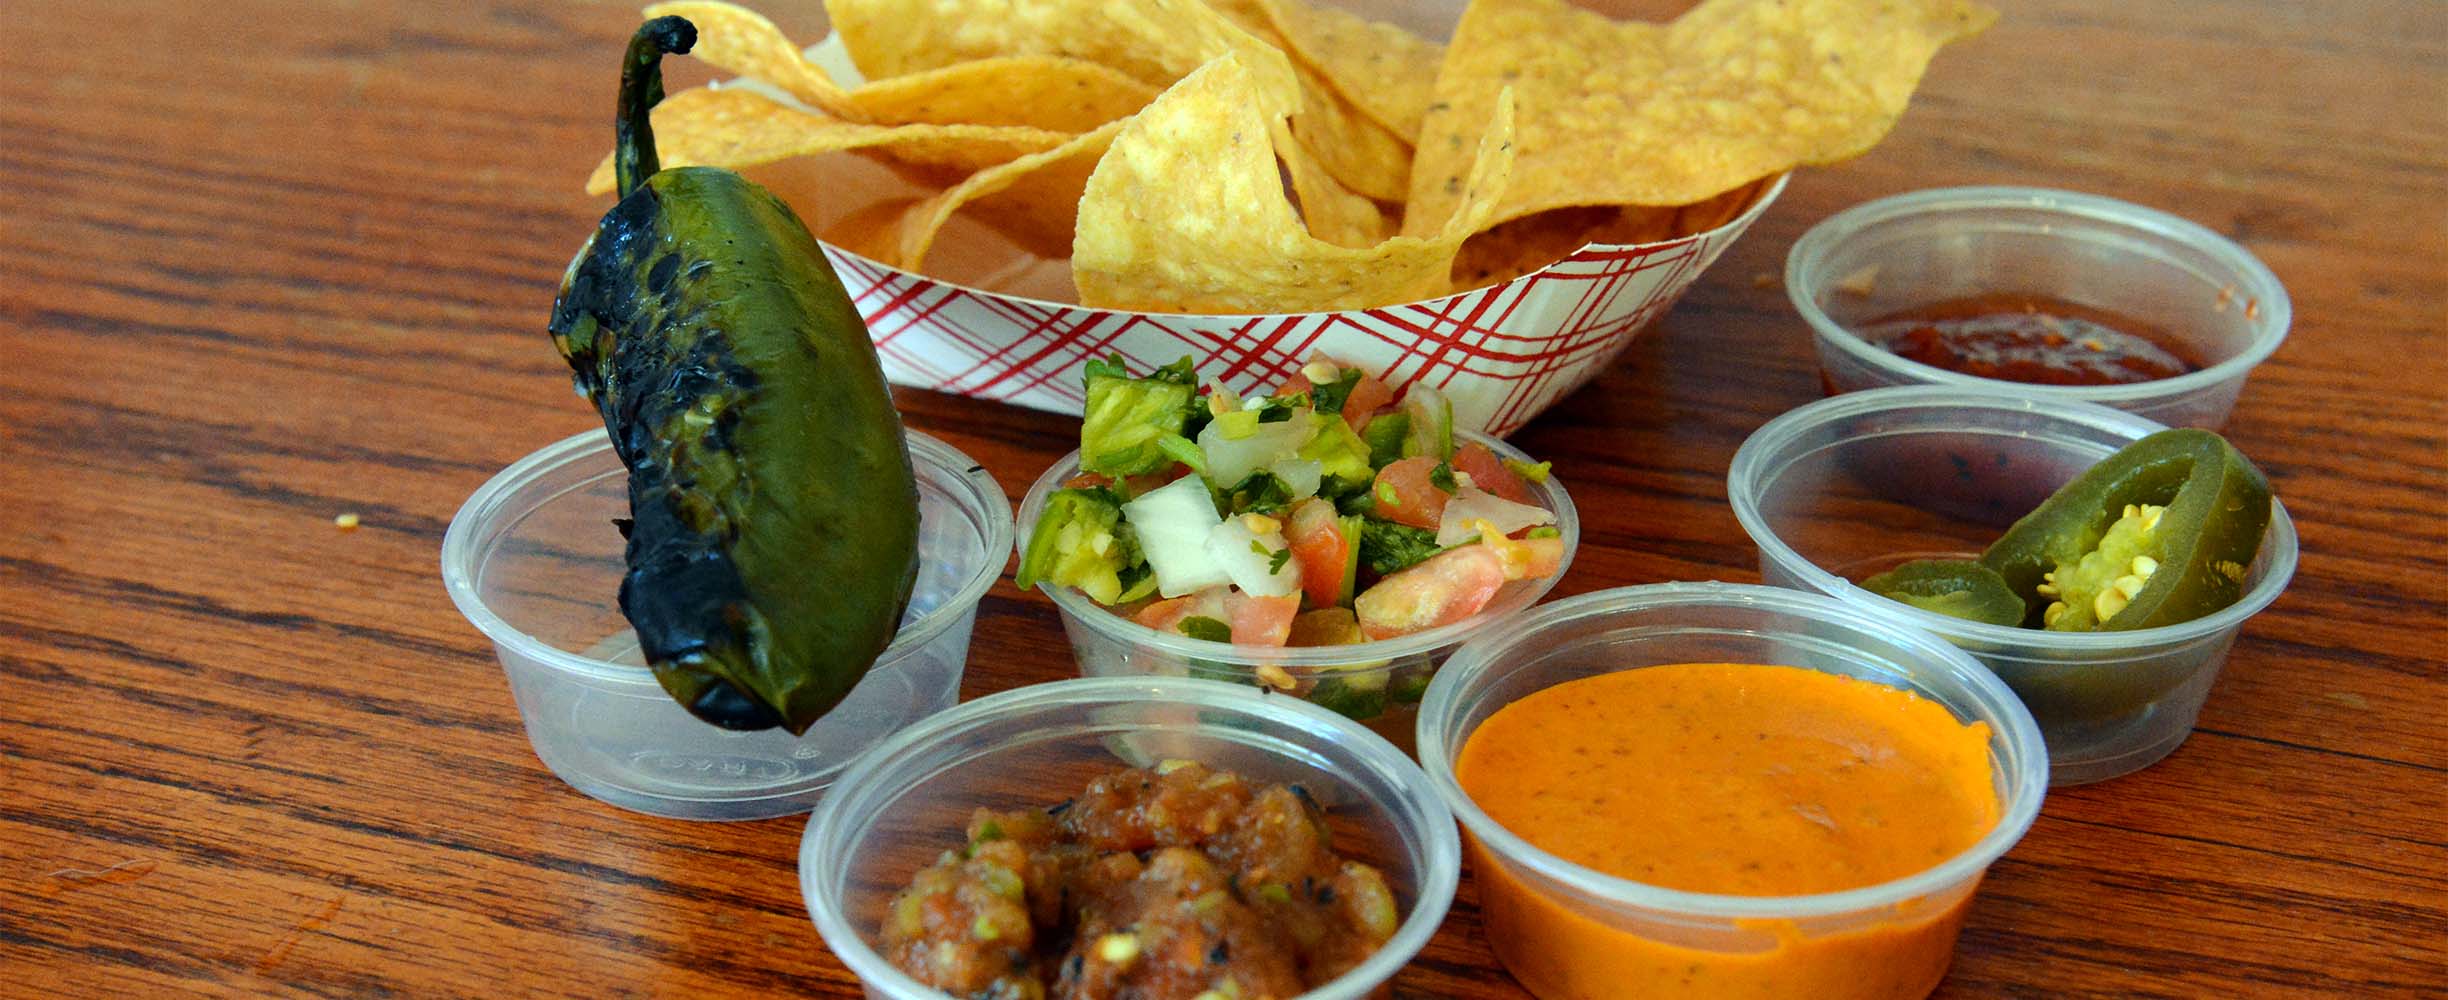 Award winning best Mexican Salsas in the Missio district, San Francisco